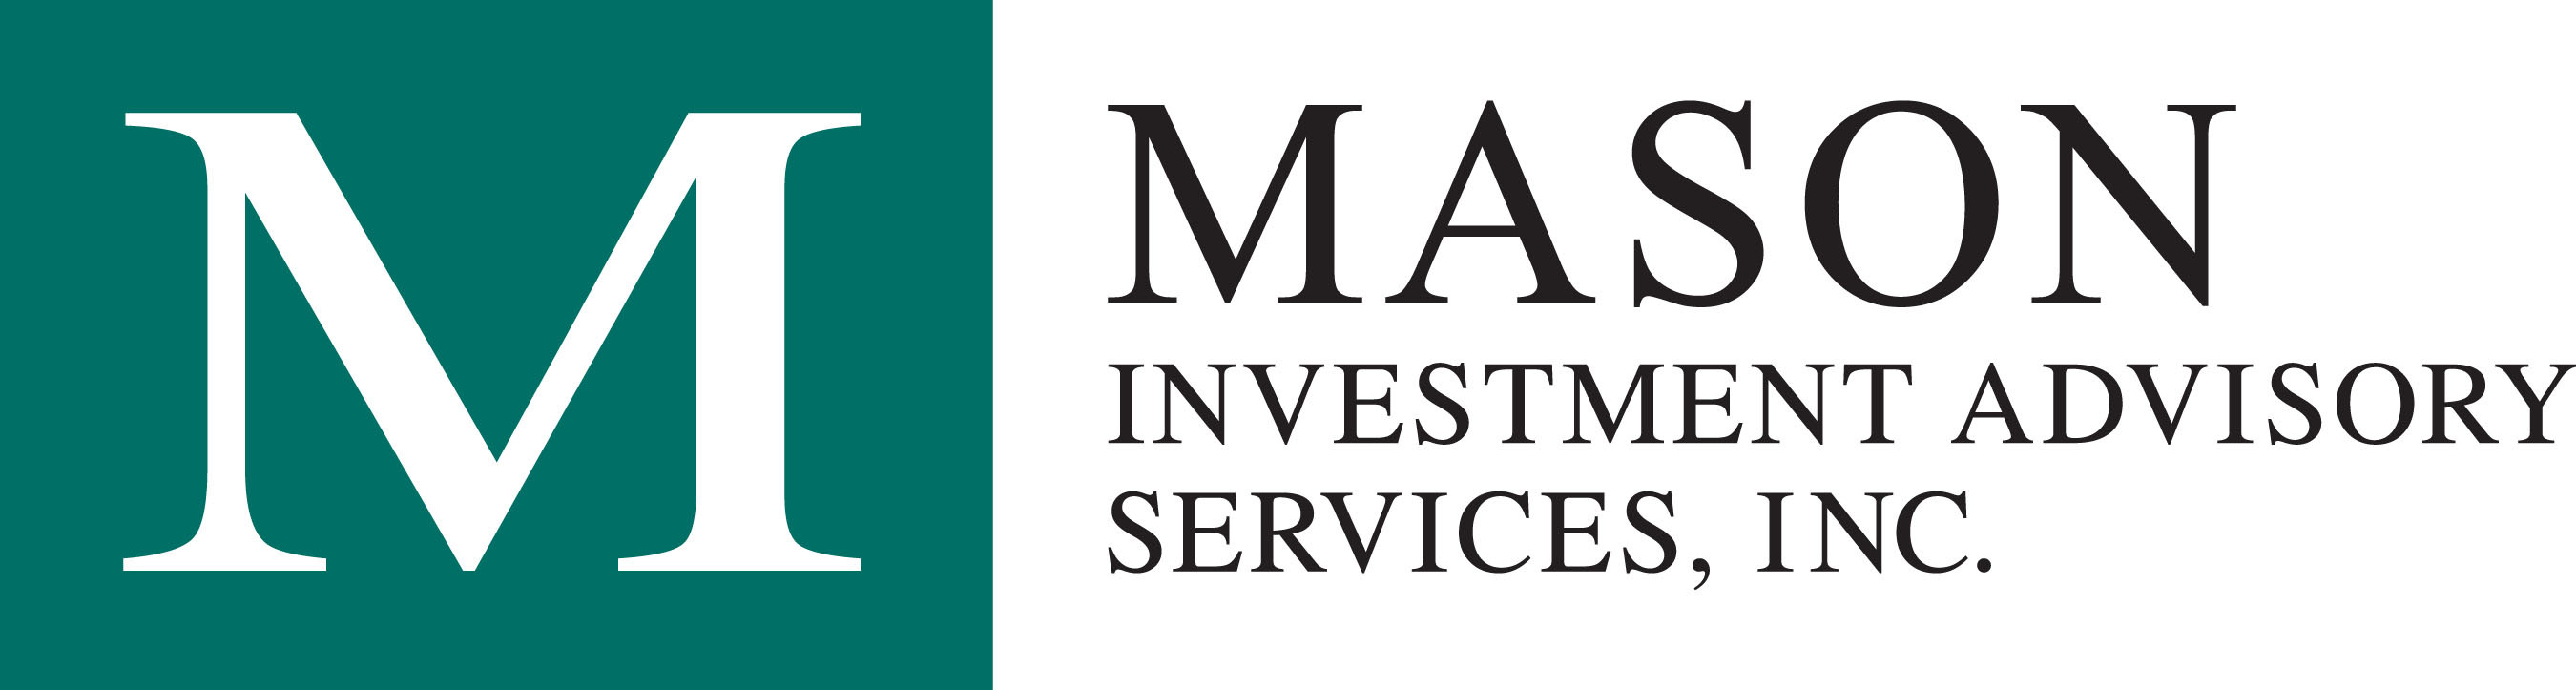 OCIO Firm, Mason, Presents a Unique View on Hedge Funds and Private Equity for Institutional Investors